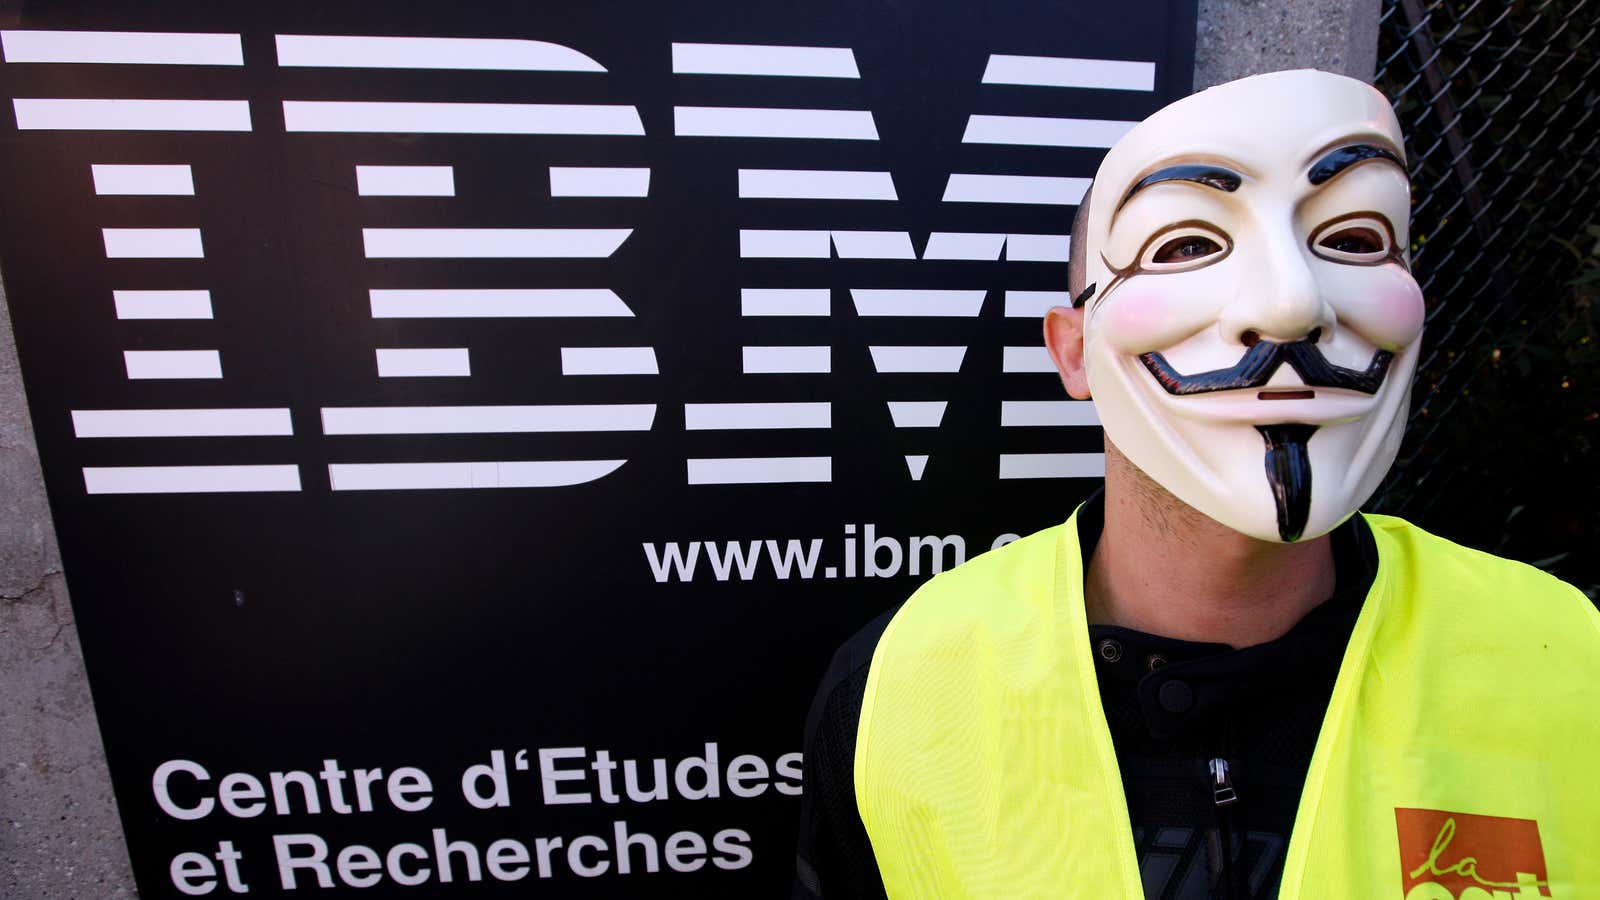 Who knows where this IBM employee actually works? Certainly not the tax man.